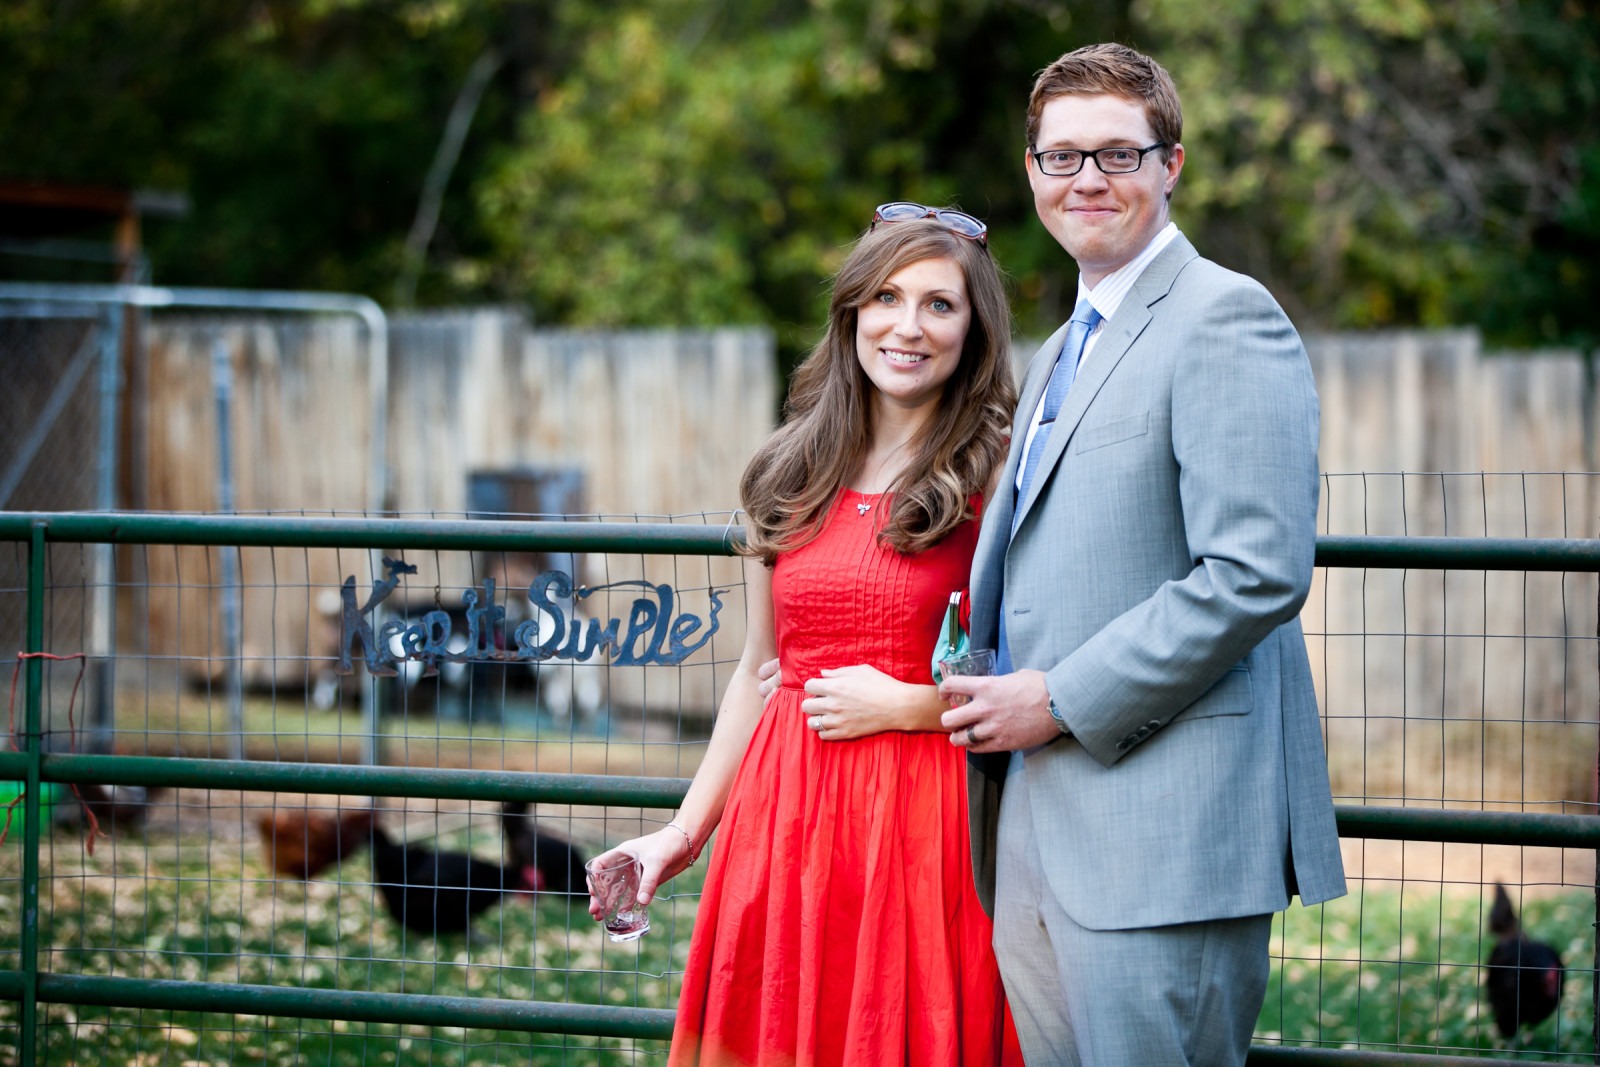 a man in a suit and a woman in a red dress stand in front of a fence